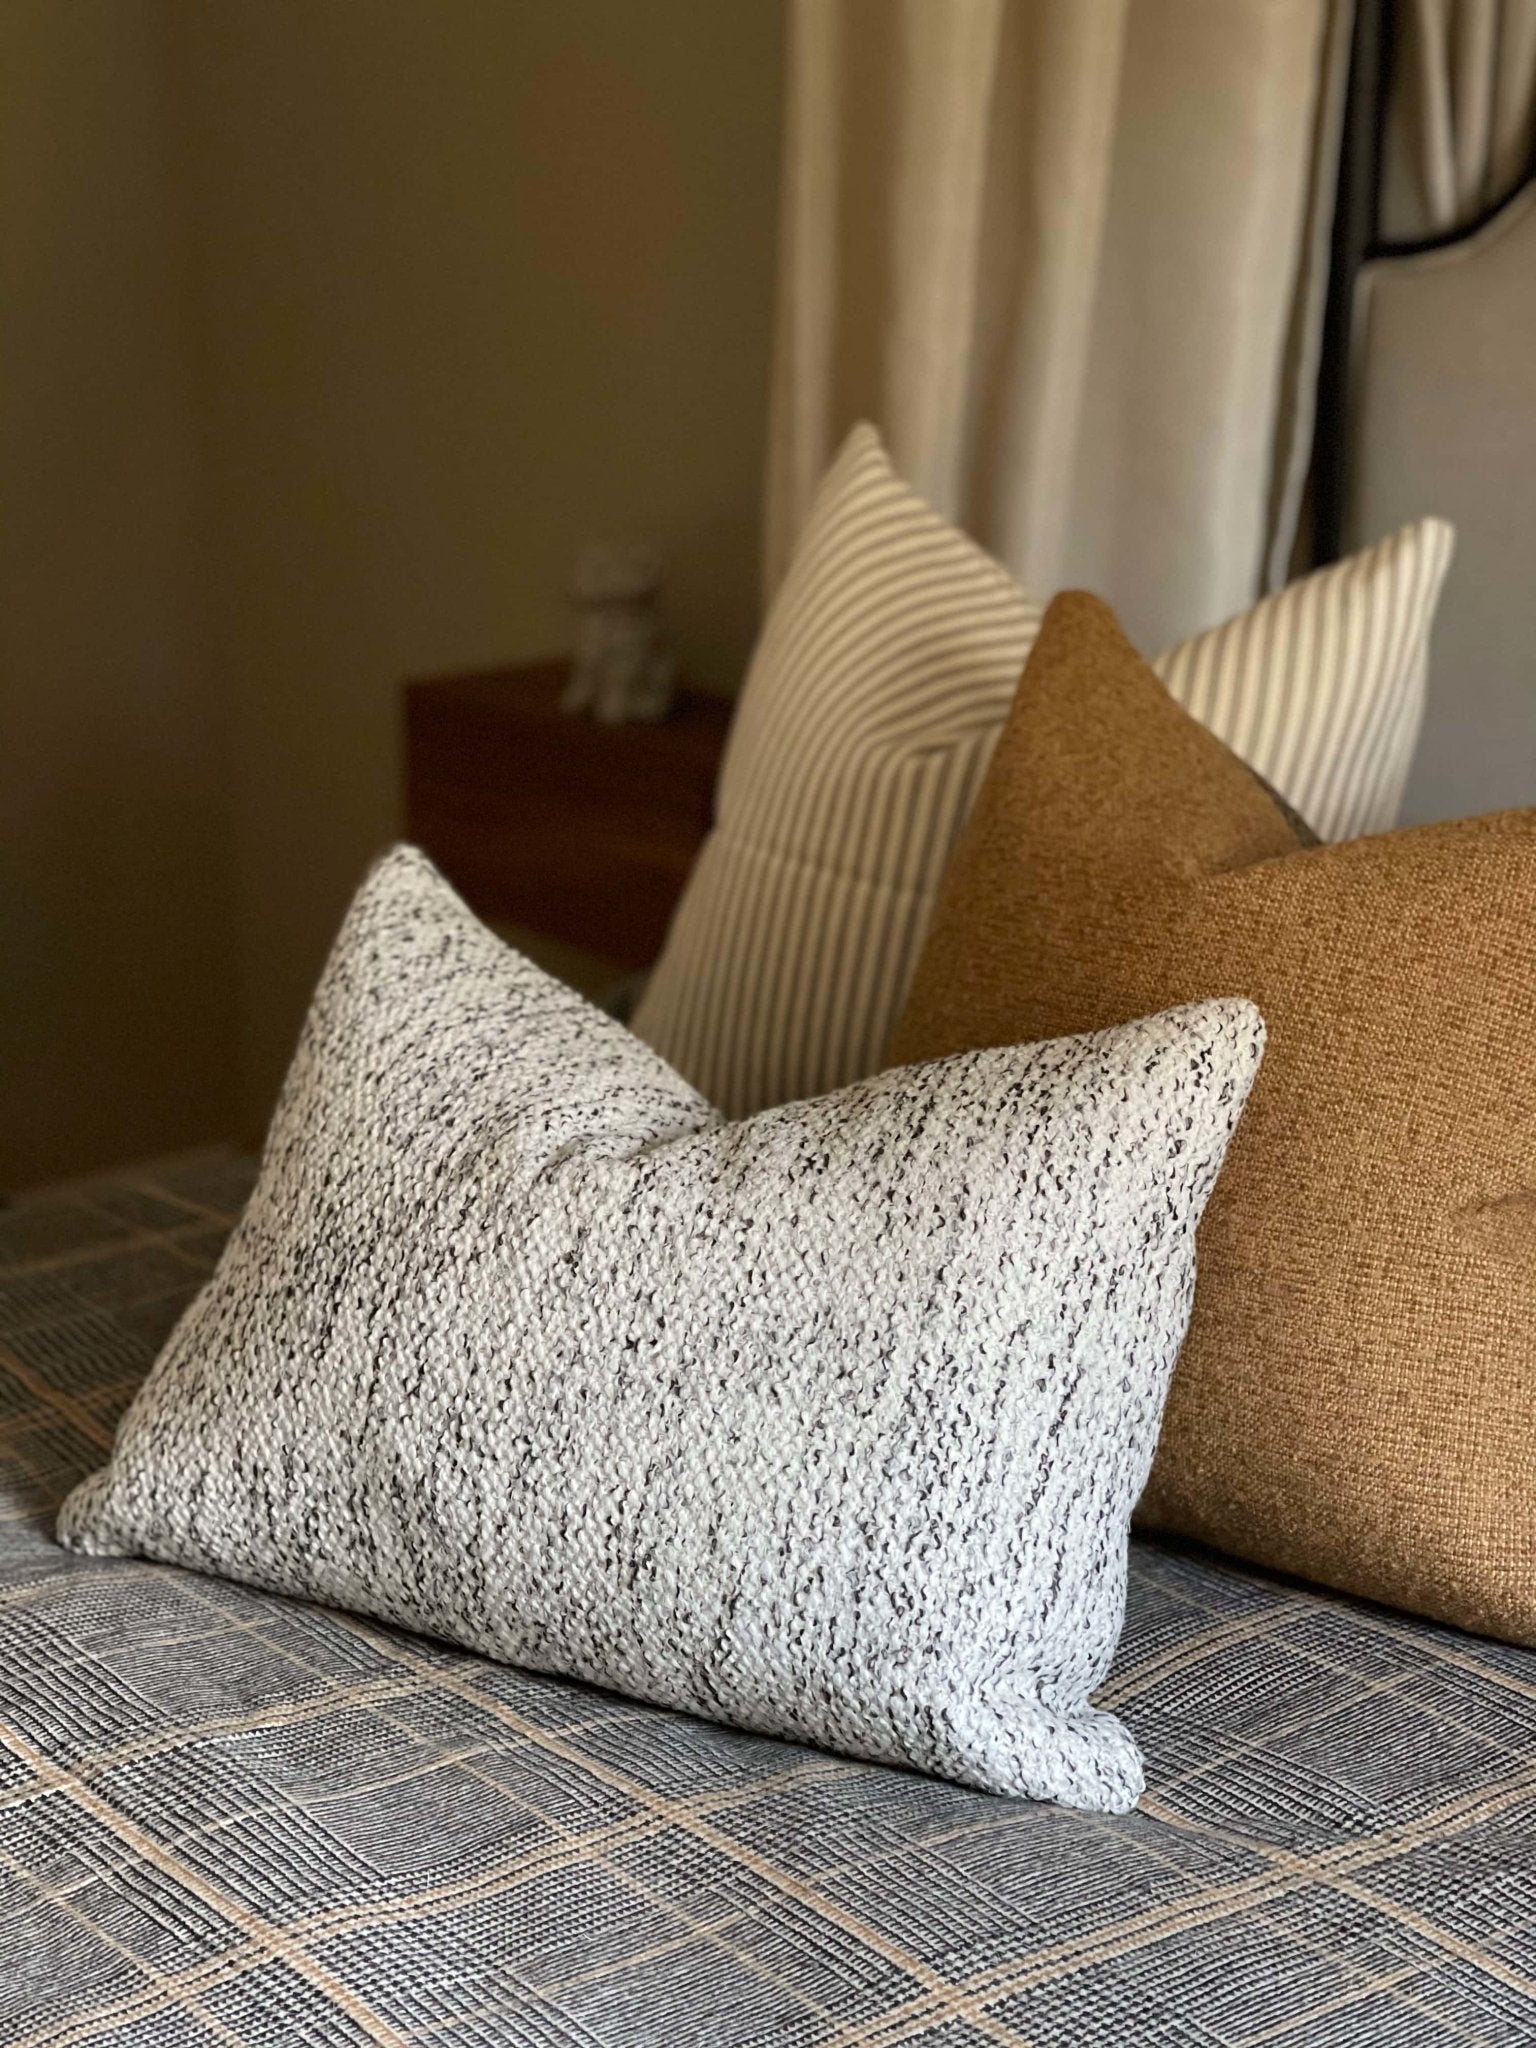 Neutral pillow set for bed featuring a cream boucle lumbar pillow, a tan boucle square pillow, and a beige ticking striped pillow.